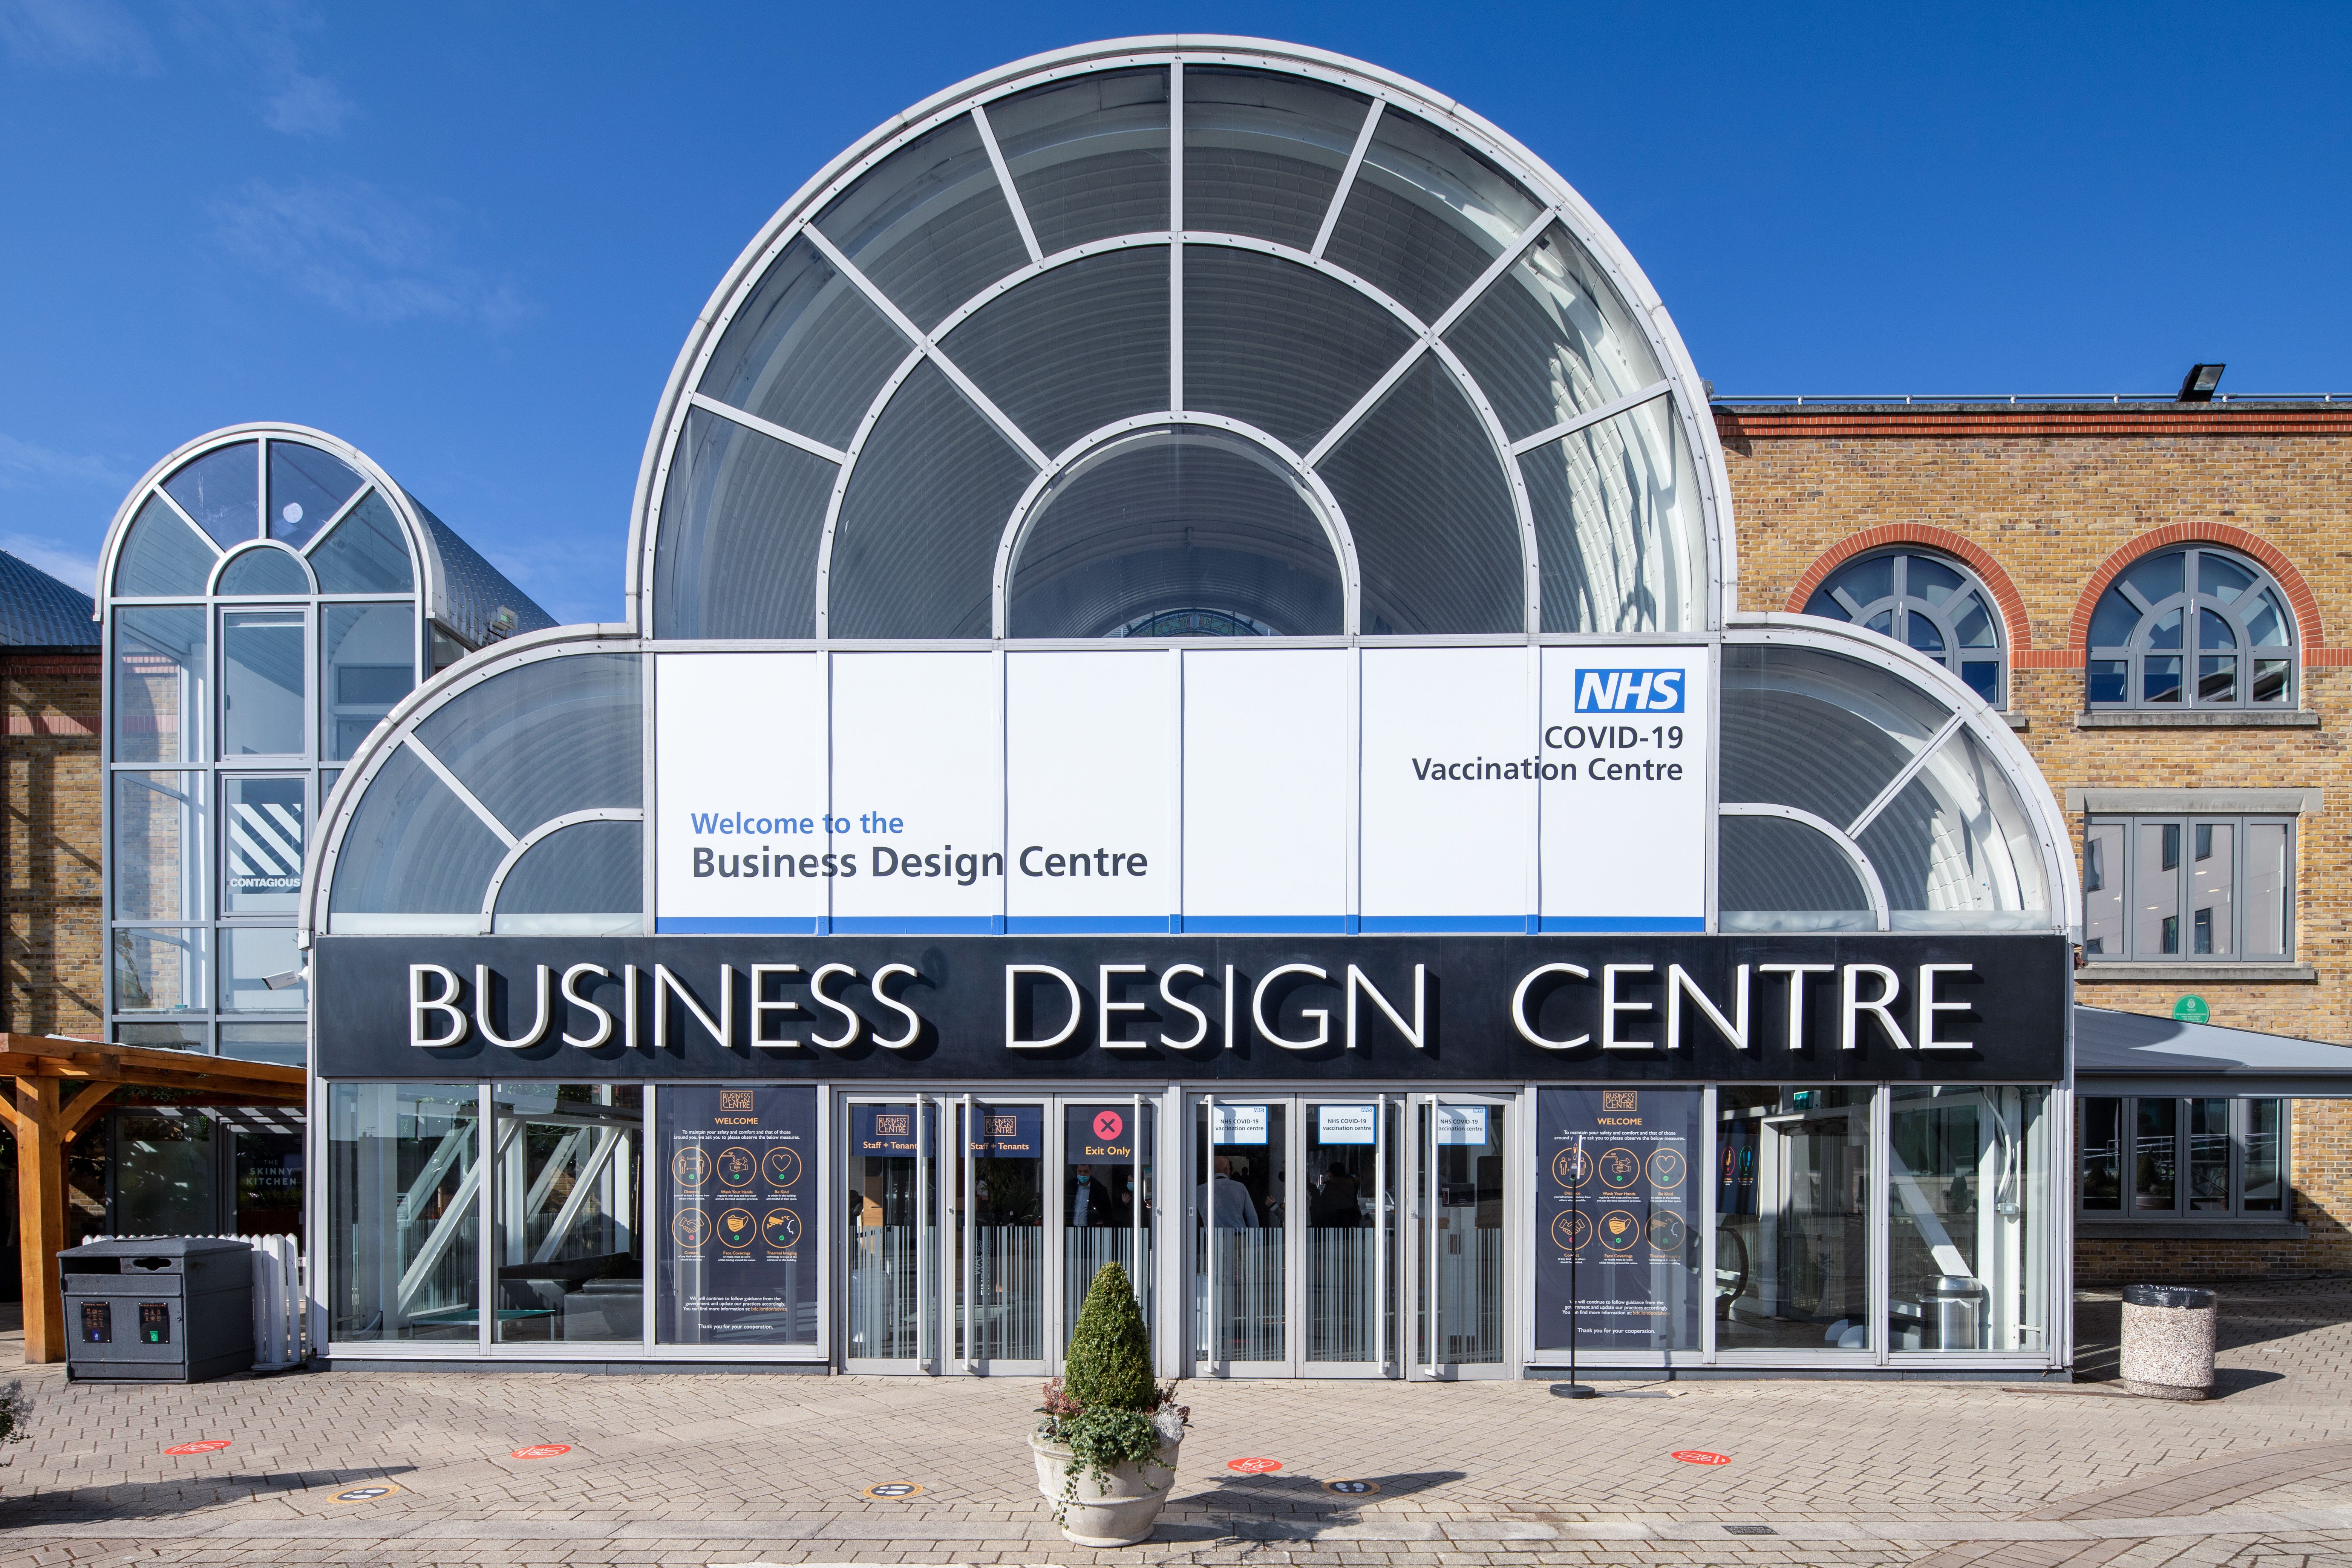 COVID-19 NHS Vaccination Centre opens at London's Business Design Centre